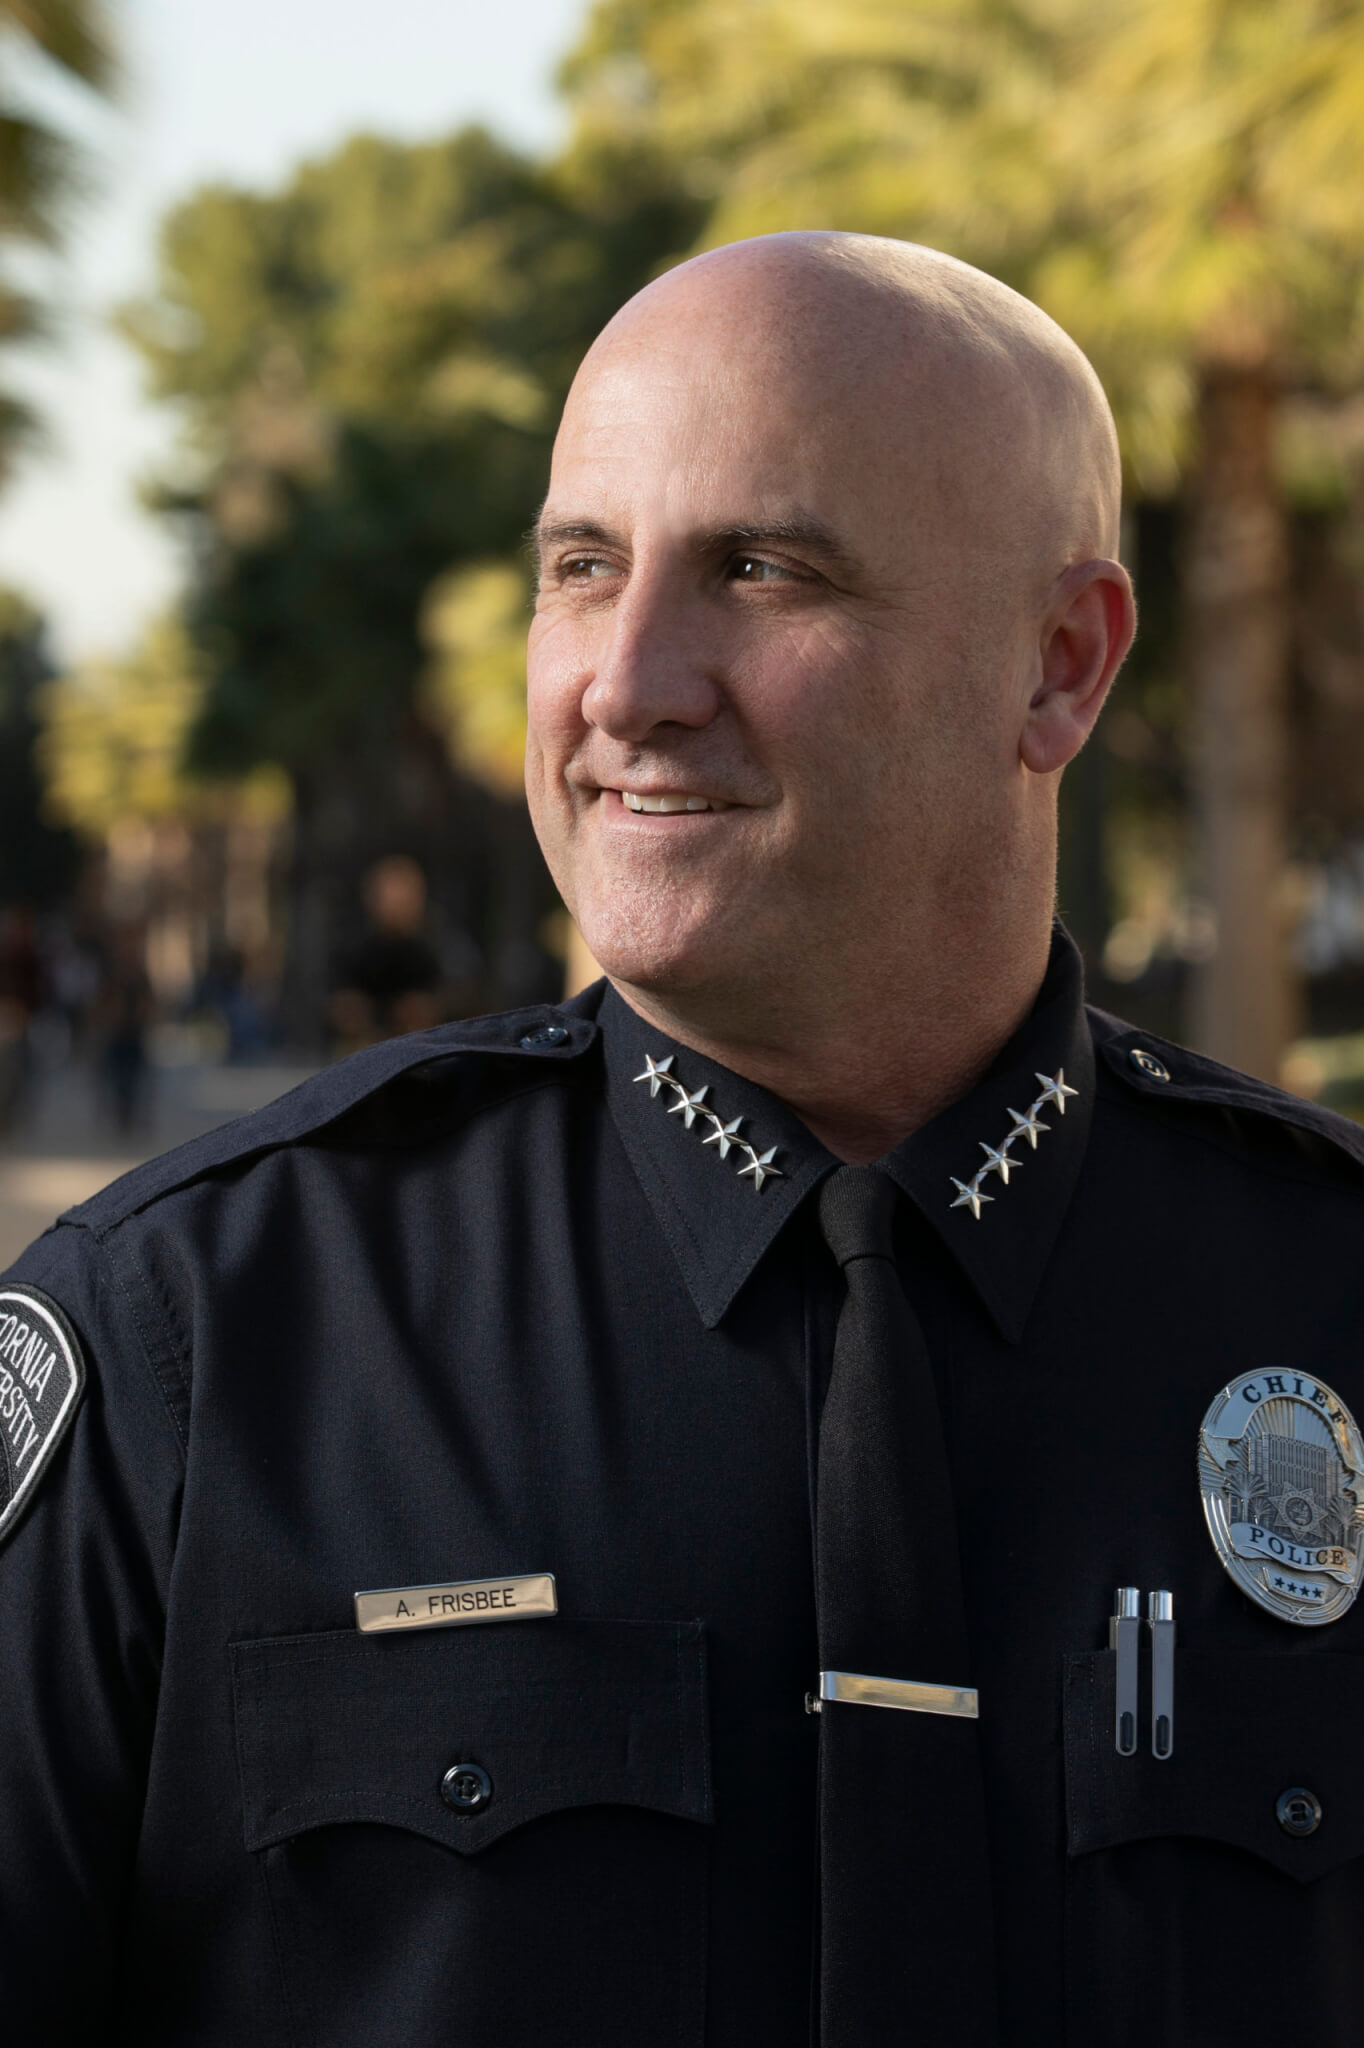 CSUF Police Chief Anthony Frisbee